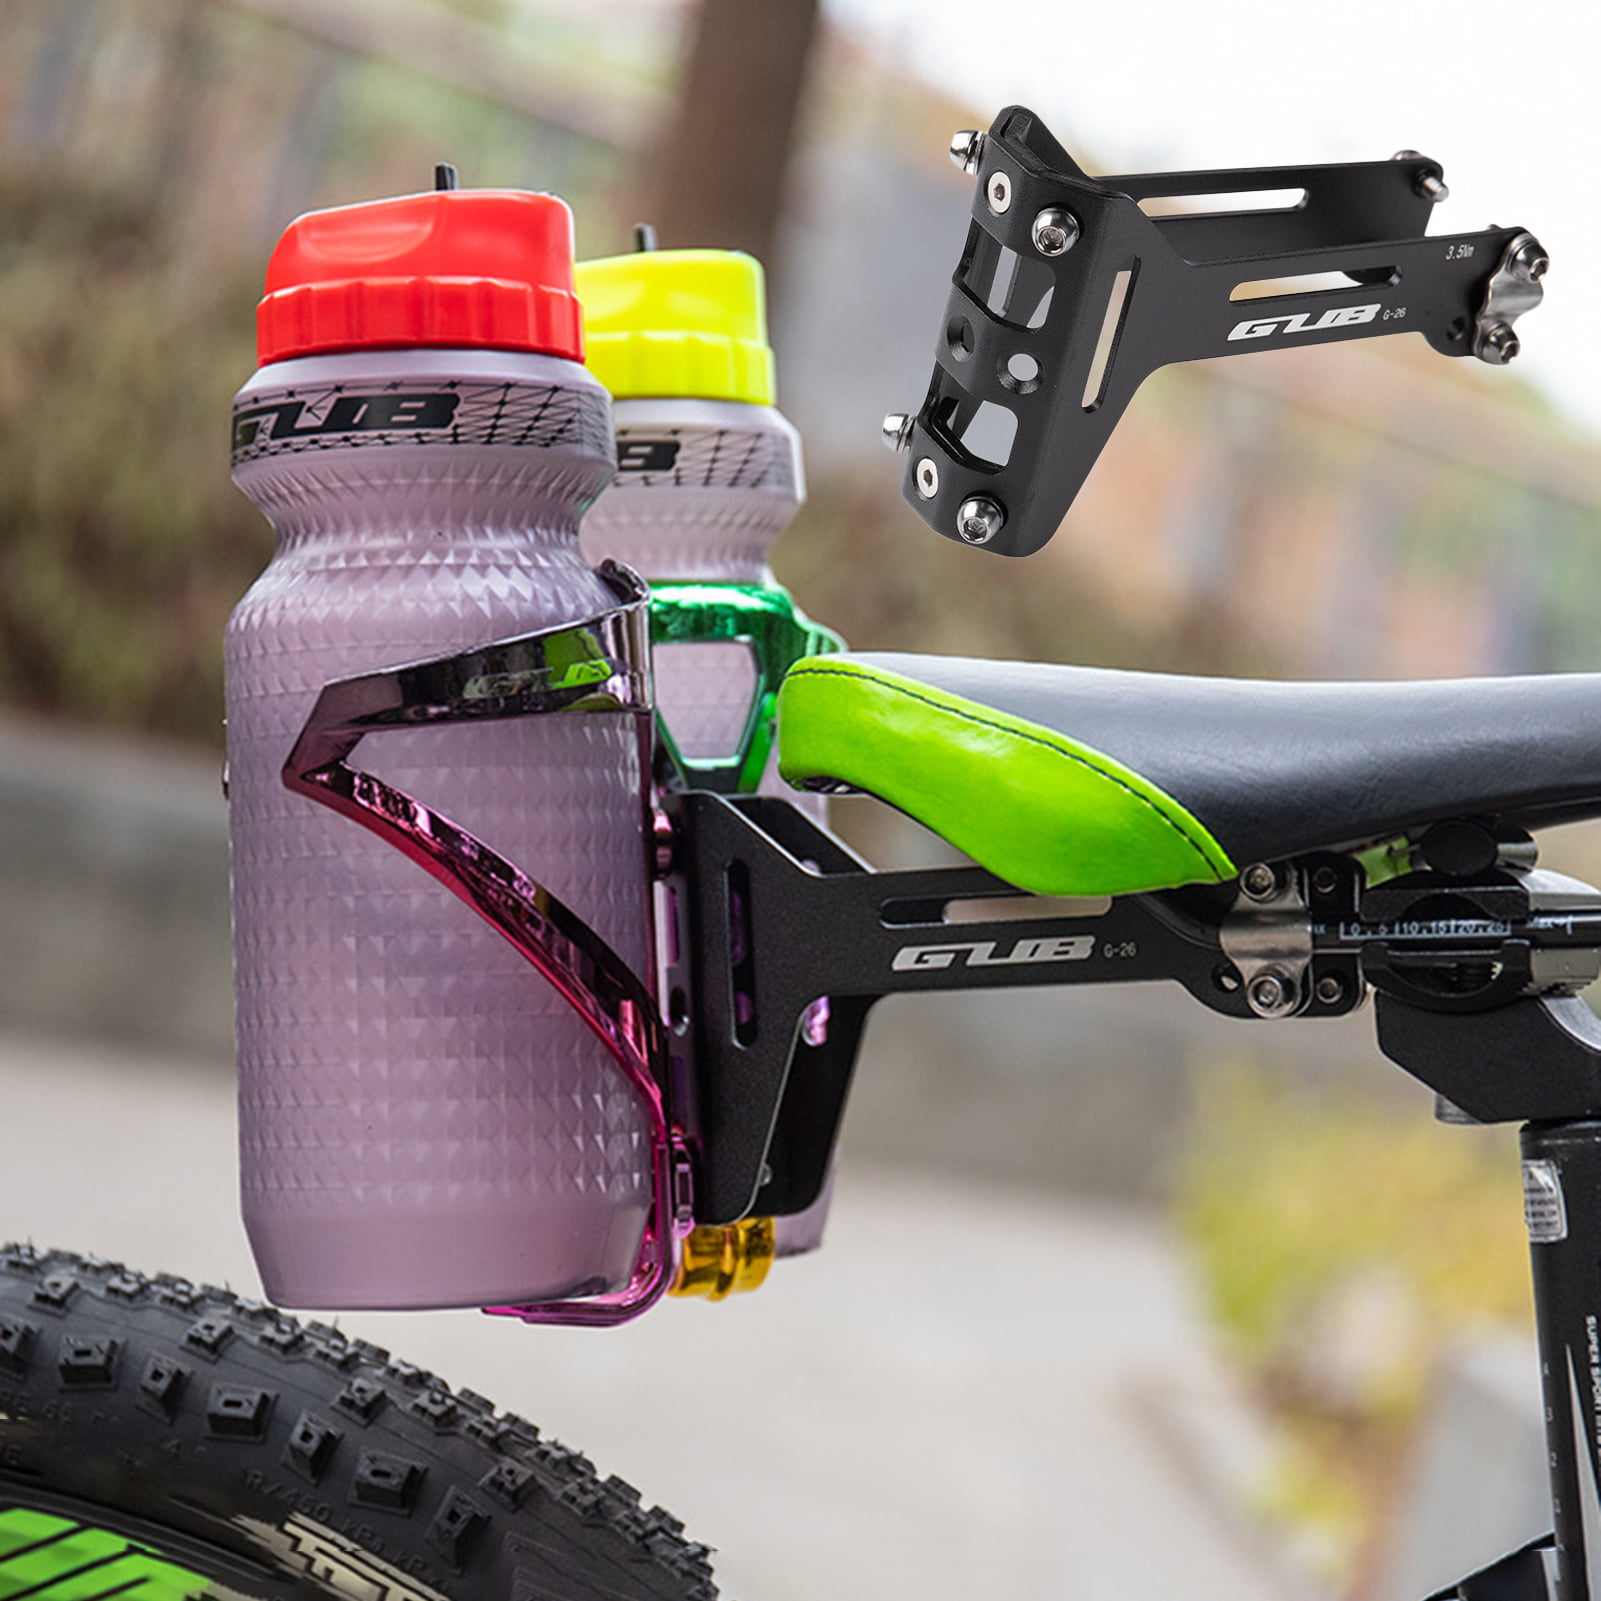 Strollers and Wheelchairs Bicycles Childrens Bicycles Ultralight Aluminium Bike Cup Holder Water Bottle Cages with Bottle Cage Adapter for Mountain Bikes Bike Bottle Holder